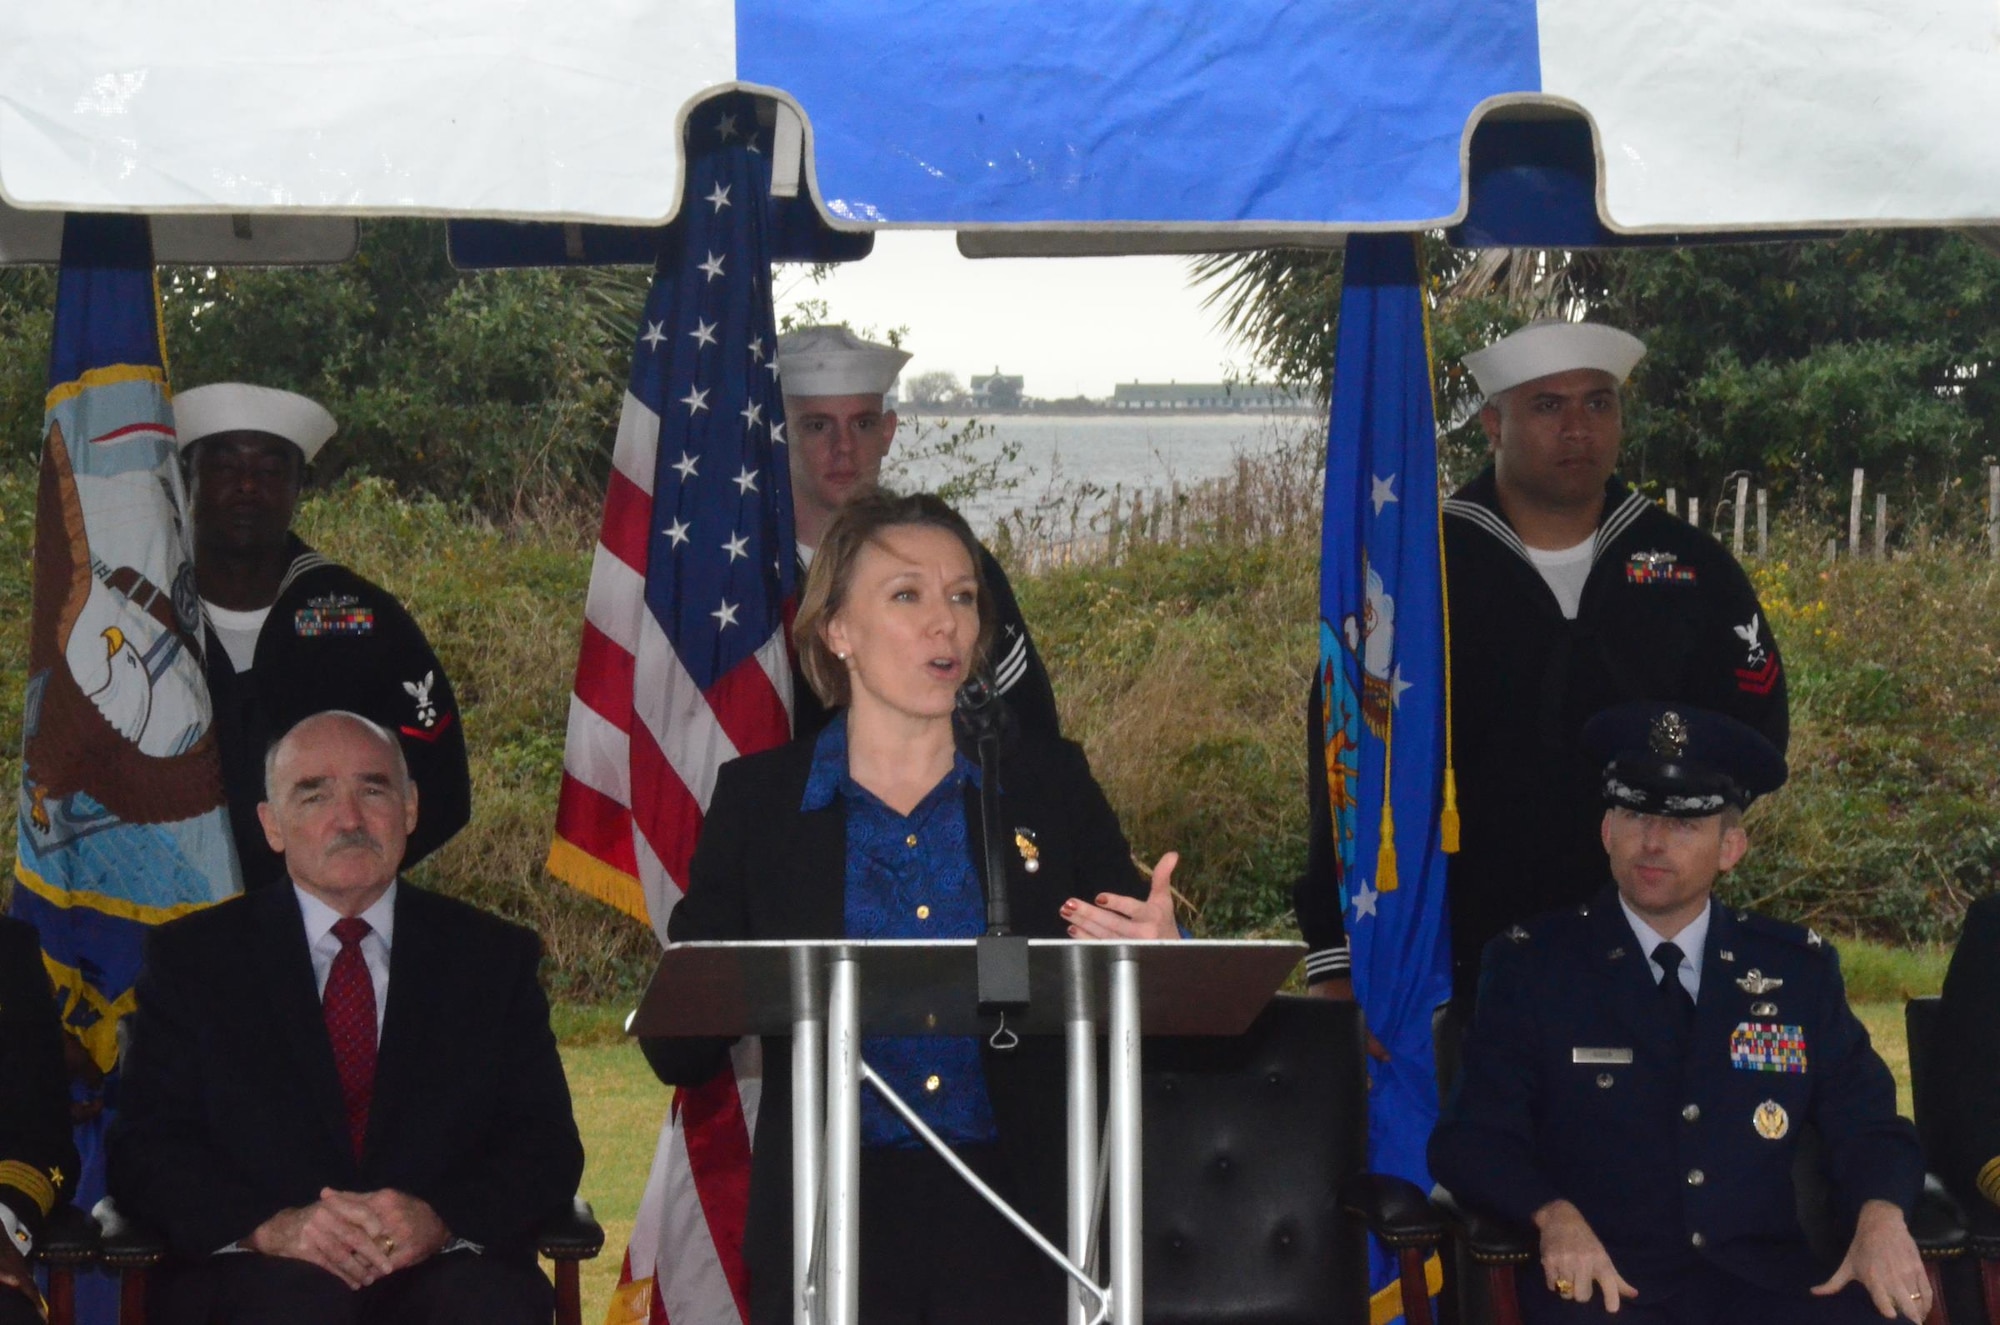 Miranda A.A. Ballentine, the assistant secretary of the Air Force for installations, environment and energy, spoke Dec. 16, 2015, at a groundbreaking ceremony at Naval Air Station Pensacola, Fla., marking the start of construction for three large-scale solar electric generating facilities.  (U.S. Navy photo/Mike O'Connor)